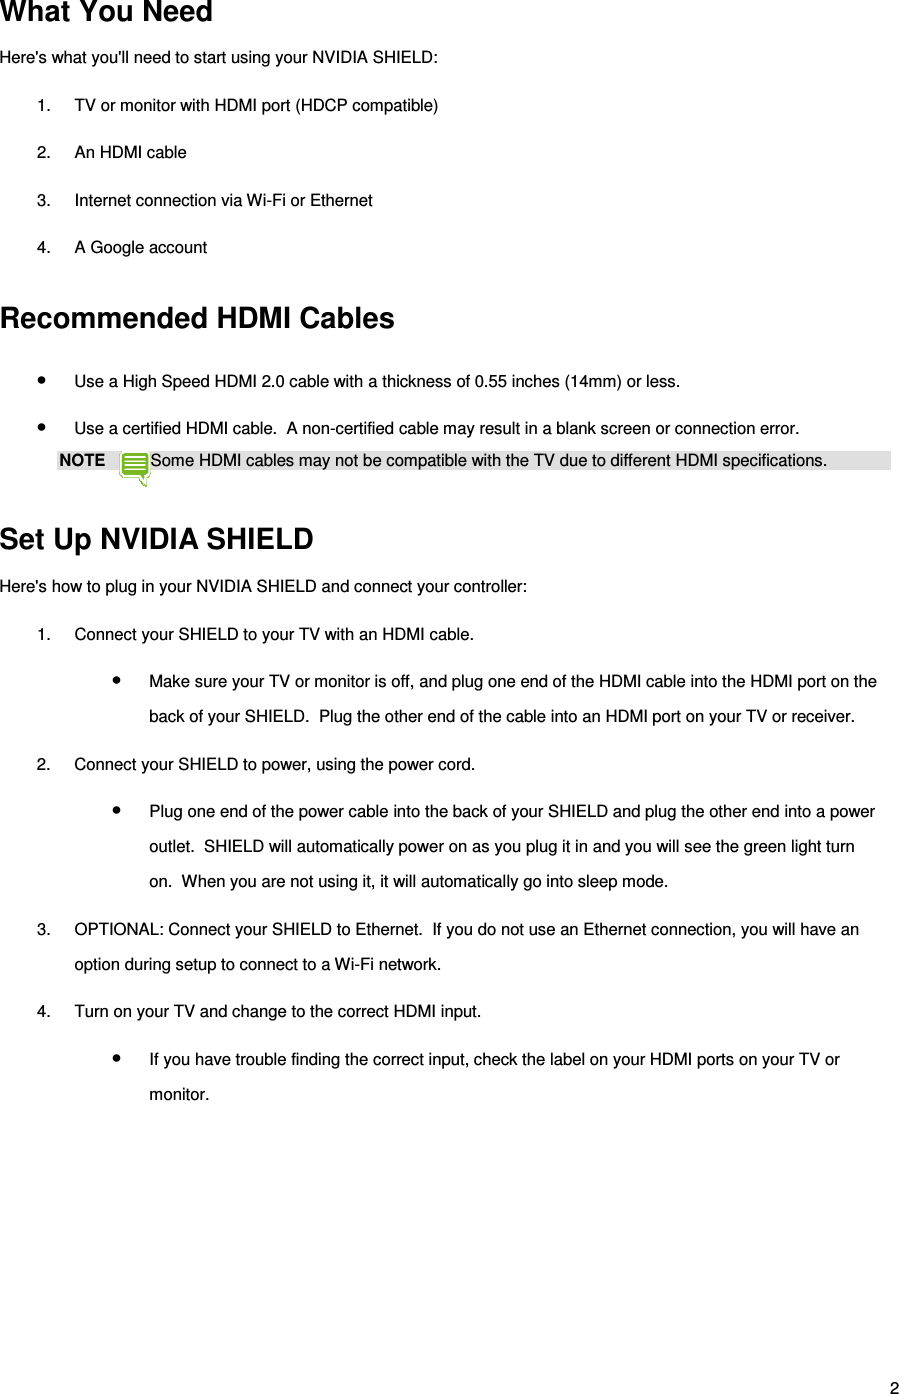 2 What You Need Here&apos;s what you&apos;ll need to start using your NVIDIA SHIELD: 1.  TV or monitor with HDMI port (HDCP compatible) 2.  An HDMI cable 3.  Internet connection via Wi-Fi or Ethernet 4.  A Google account   Recommended HDMI Cables • Use a High Speed HDMI 2.0 cable with a thickness of 0.55 inches (14mm) or less. • Use a certified HDMI cable.  A non-certified cable may result in a blank screen or connection error. NOTE  Some HDMI cables may not be compatible with the TV due to different HDMI specifications.  Set Up NVIDIA SHIELD Here&apos;s how to plug in your NVIDIA SHIELD and connect your controller: 1.  Connect your SHIELD to your TV with an HDMI cable. • Make sure your TV or monitor is off, and plug one end of the HDMI cable into the HDMI port on the back of your SHIELD.  Plug the other end of the cable into an HDMI port on your TV or receiver. 2.  Connect your SHIELD to power, using the power cord. • Plug one end of the power cable into the back of your SHIELD and plug the other end into a power outlet.  SHIELD will automatically power on as you plug it in and you will see the green light turn on.  When you are not using it, it will automatically go into sleep mode. 3.  OPTIONAL: Connect your SHIELD to Ethernet.  If you do not use an Ethernet connection, you will have an option during setup to connect to a Wi-Fi network. 4.  Turn on your TV and change to the correct HDMI input. • If you have trouble finding the correct input, check the label on your HDMI ports on your TV or monitor.   